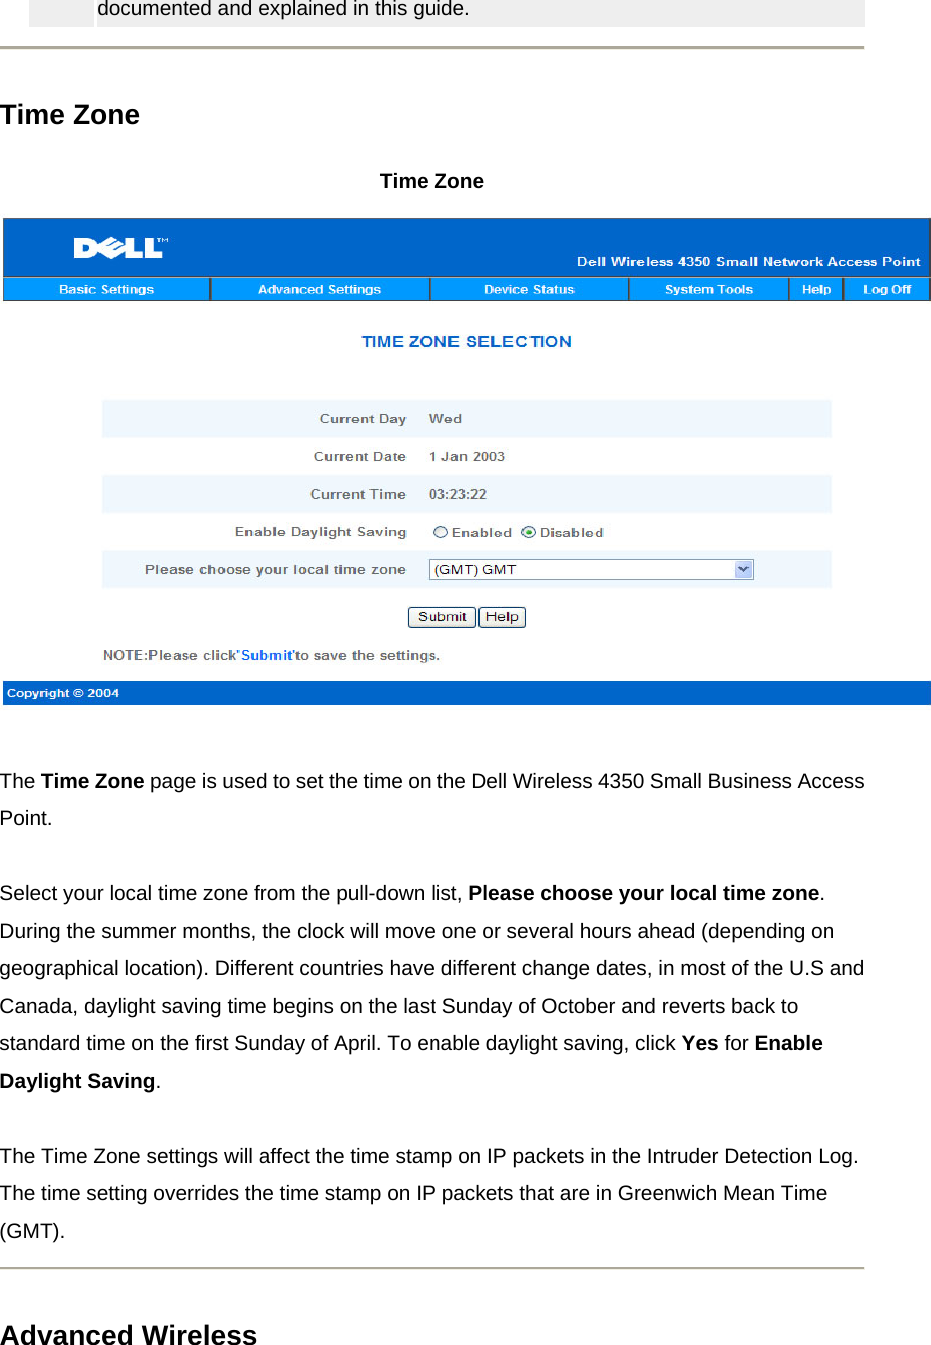 documented and explained in this guide.    Time Zone Time Zone      The Time Zone page is used to set the time on the Dell Wireless 4350 Small Business Access Point.   Select your local time zone from the pull-down list, Please choose your local time zone. During the summer months, the clock will move one or several hours ahead (depending on geographical location). Different countries have different change dates, in most of the U.S and Canada, daylight saving time begins on the last Sunday of October and reverts back to standard time on the first Sunday of April. To enable daylight saving, click Yes for Enable Daylight Saving.     The Time Zone settings will affect the time stamp on IP packets in the Intruder Detection Log. The time setting overrides the time stamp on IP packets that are in Greenwich Mean Time (GMT).   Advanced Wireless 